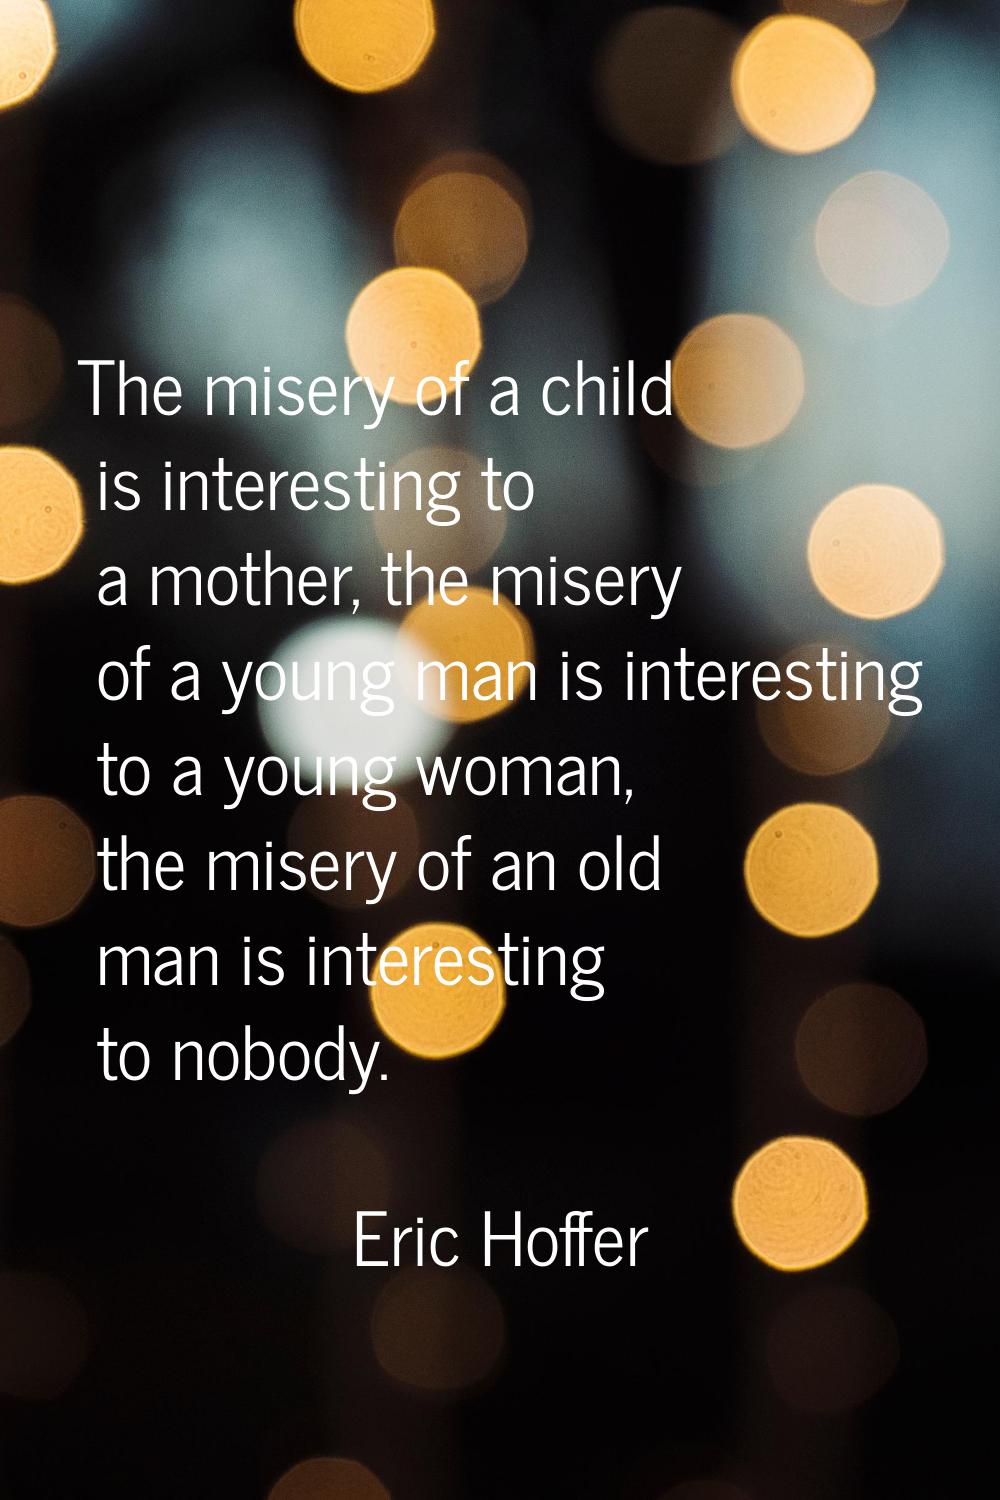 The misery of a child is interesting to a mother, the misery of a young man is interesting to a you